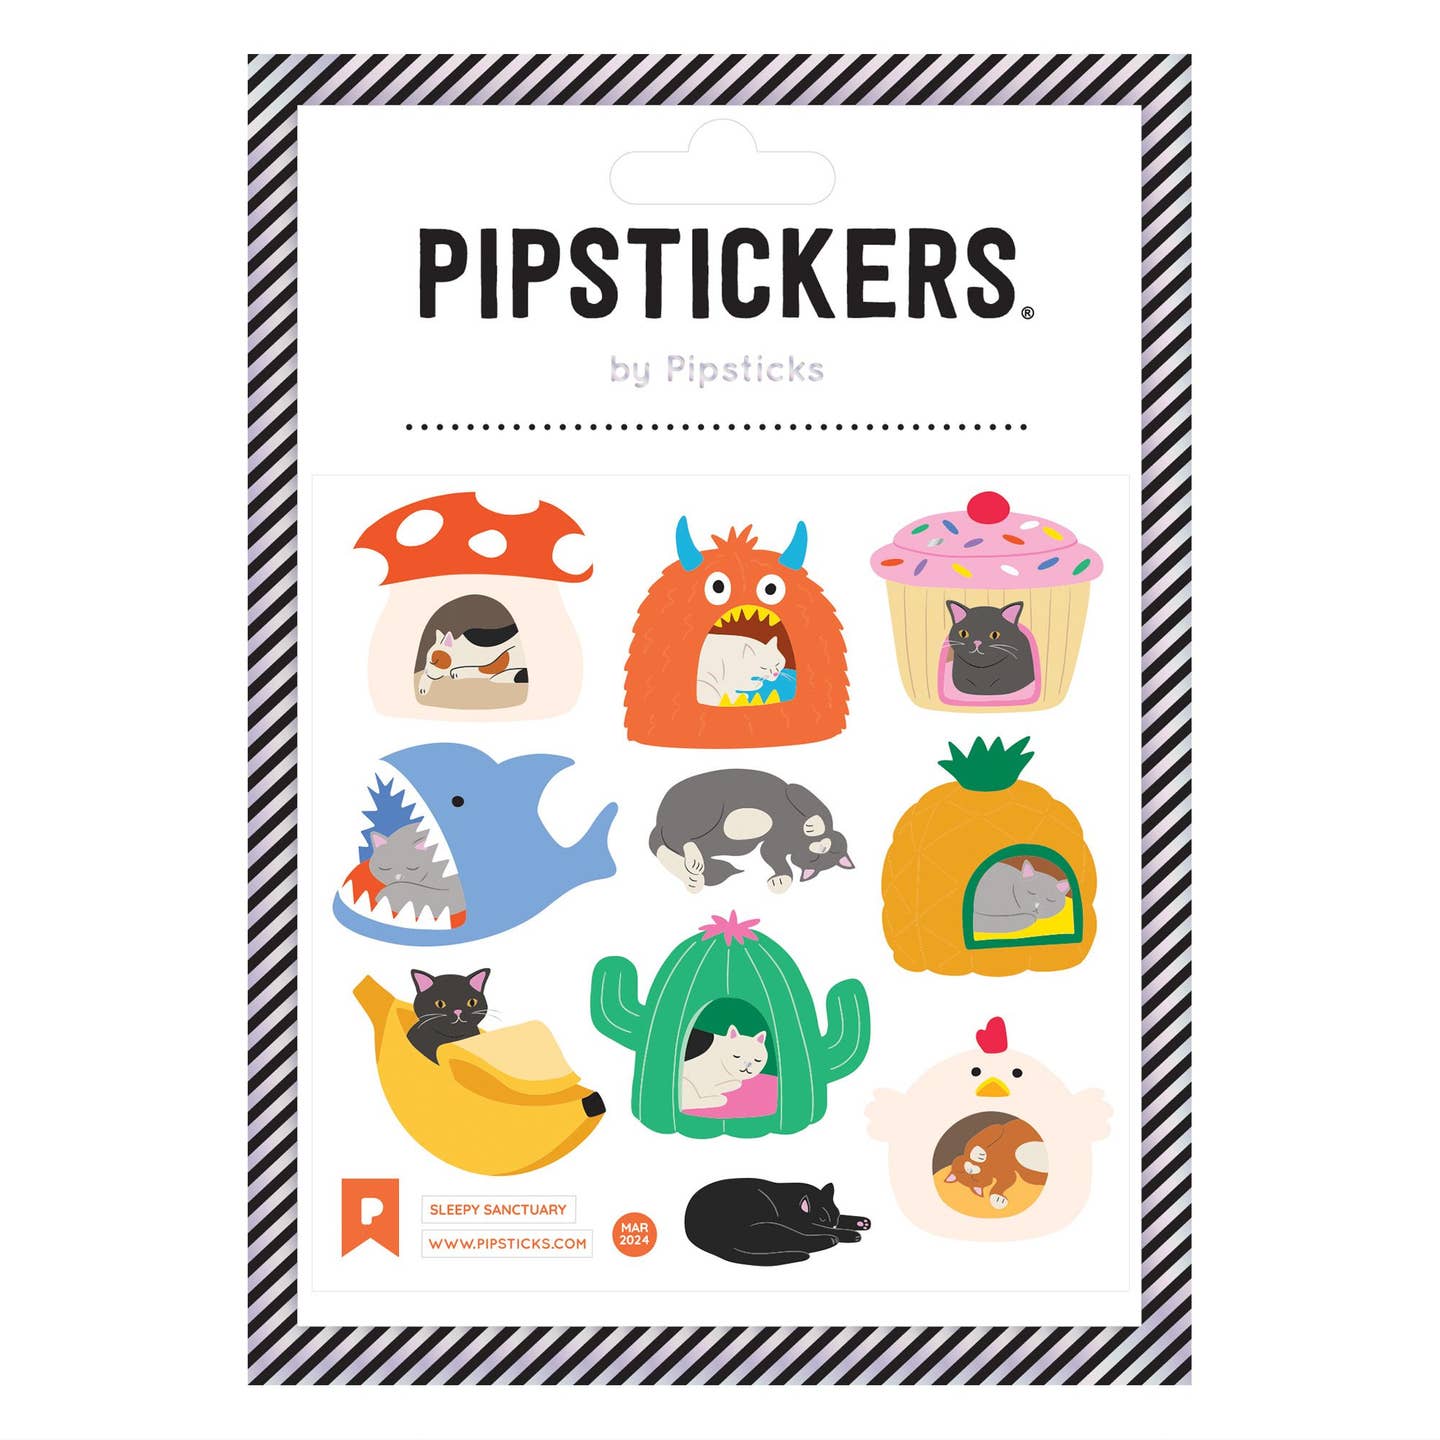 Sticker sheet with images of cats curled up in various places like a cupcake, pineapple, shark, banana, cactus and toadstool .